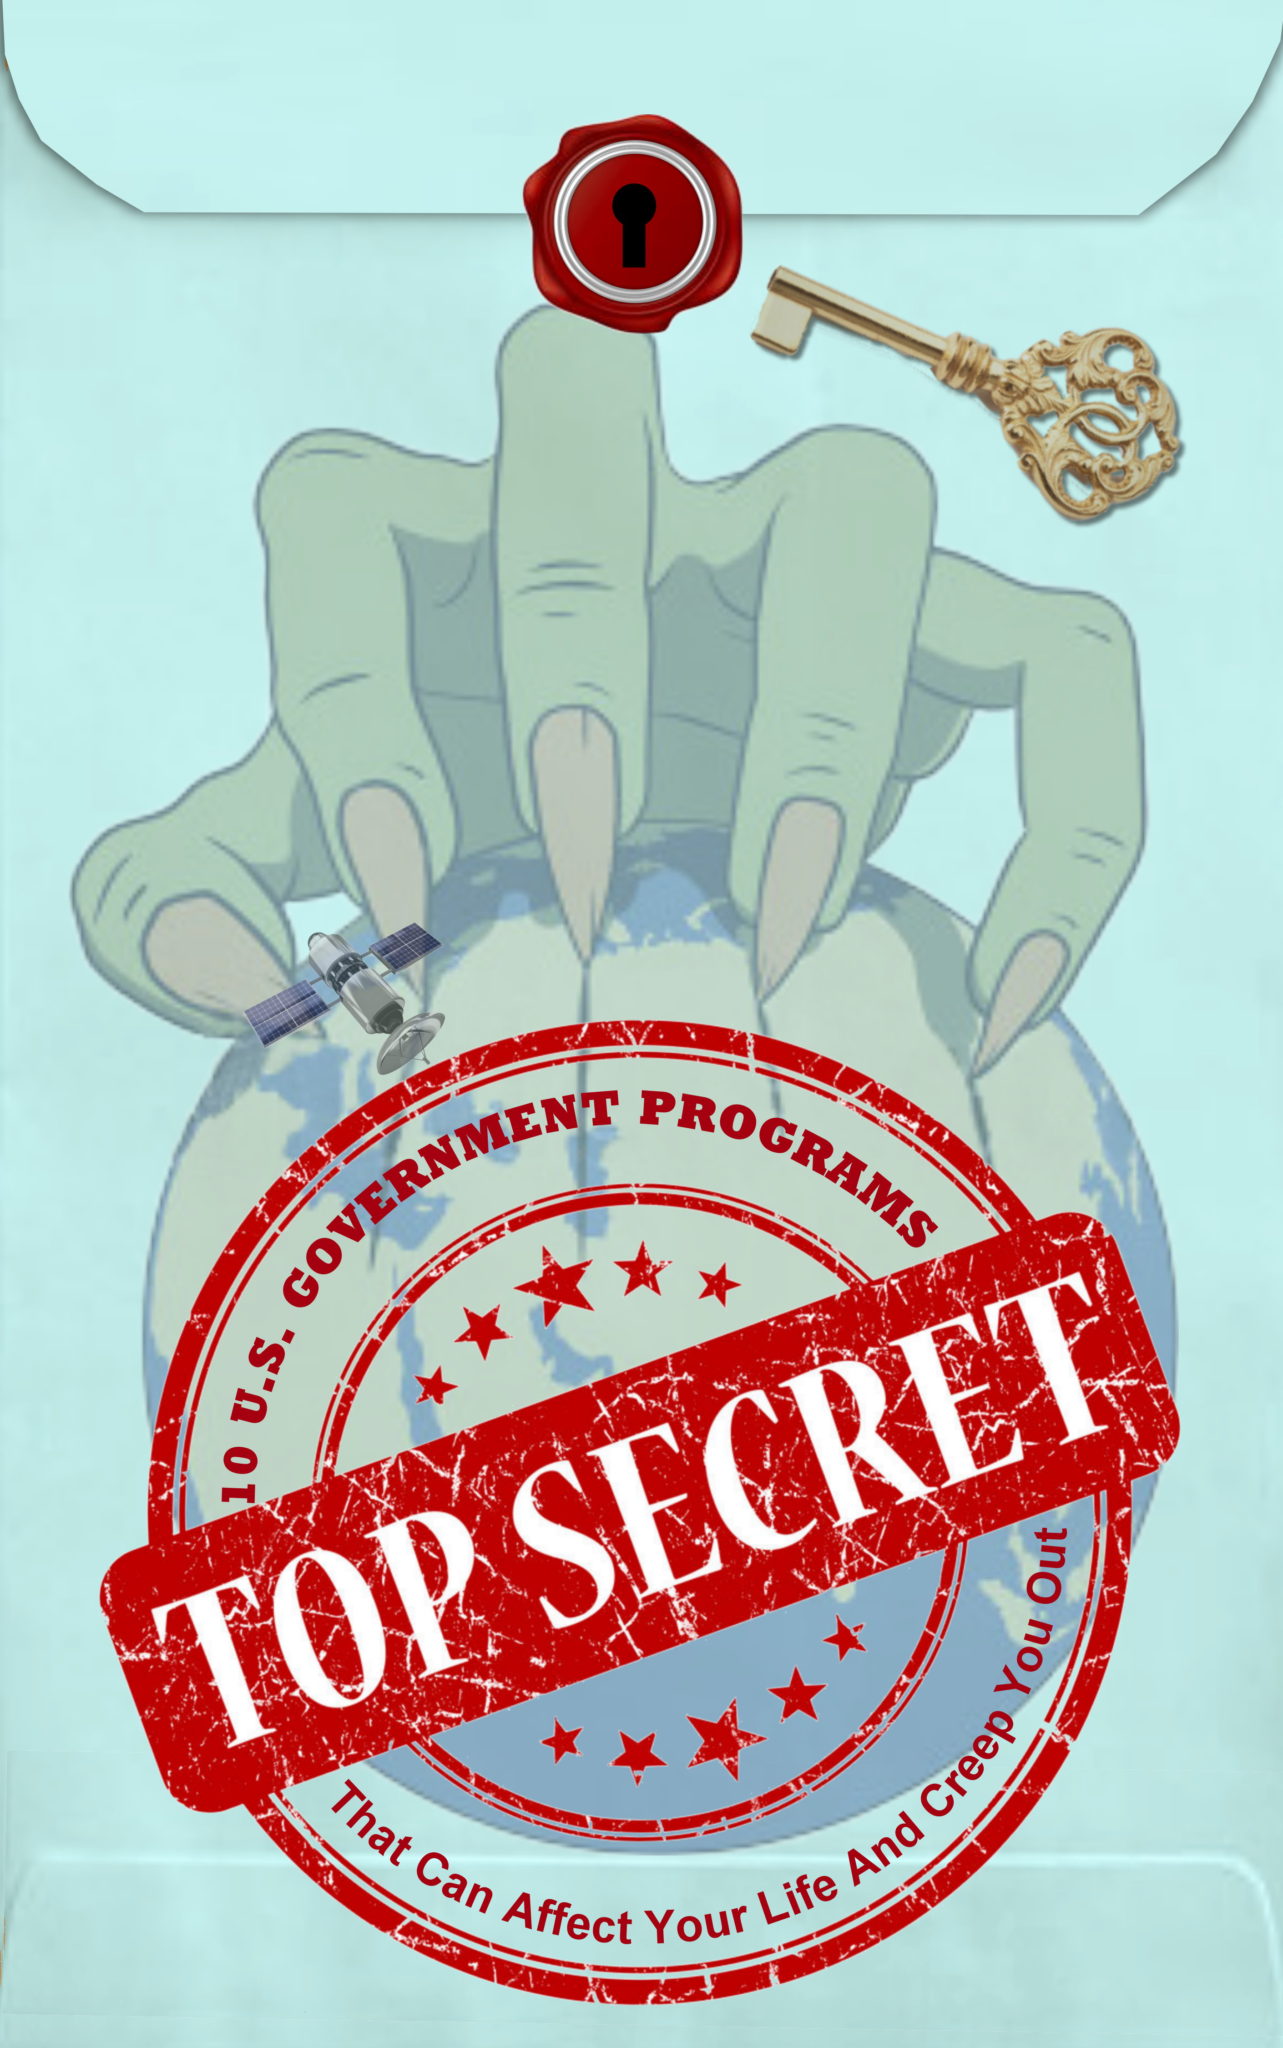 FREE: 10 U.S. Government Programs: That Can Affect Your Life & Creep You Out by Michael Arangua